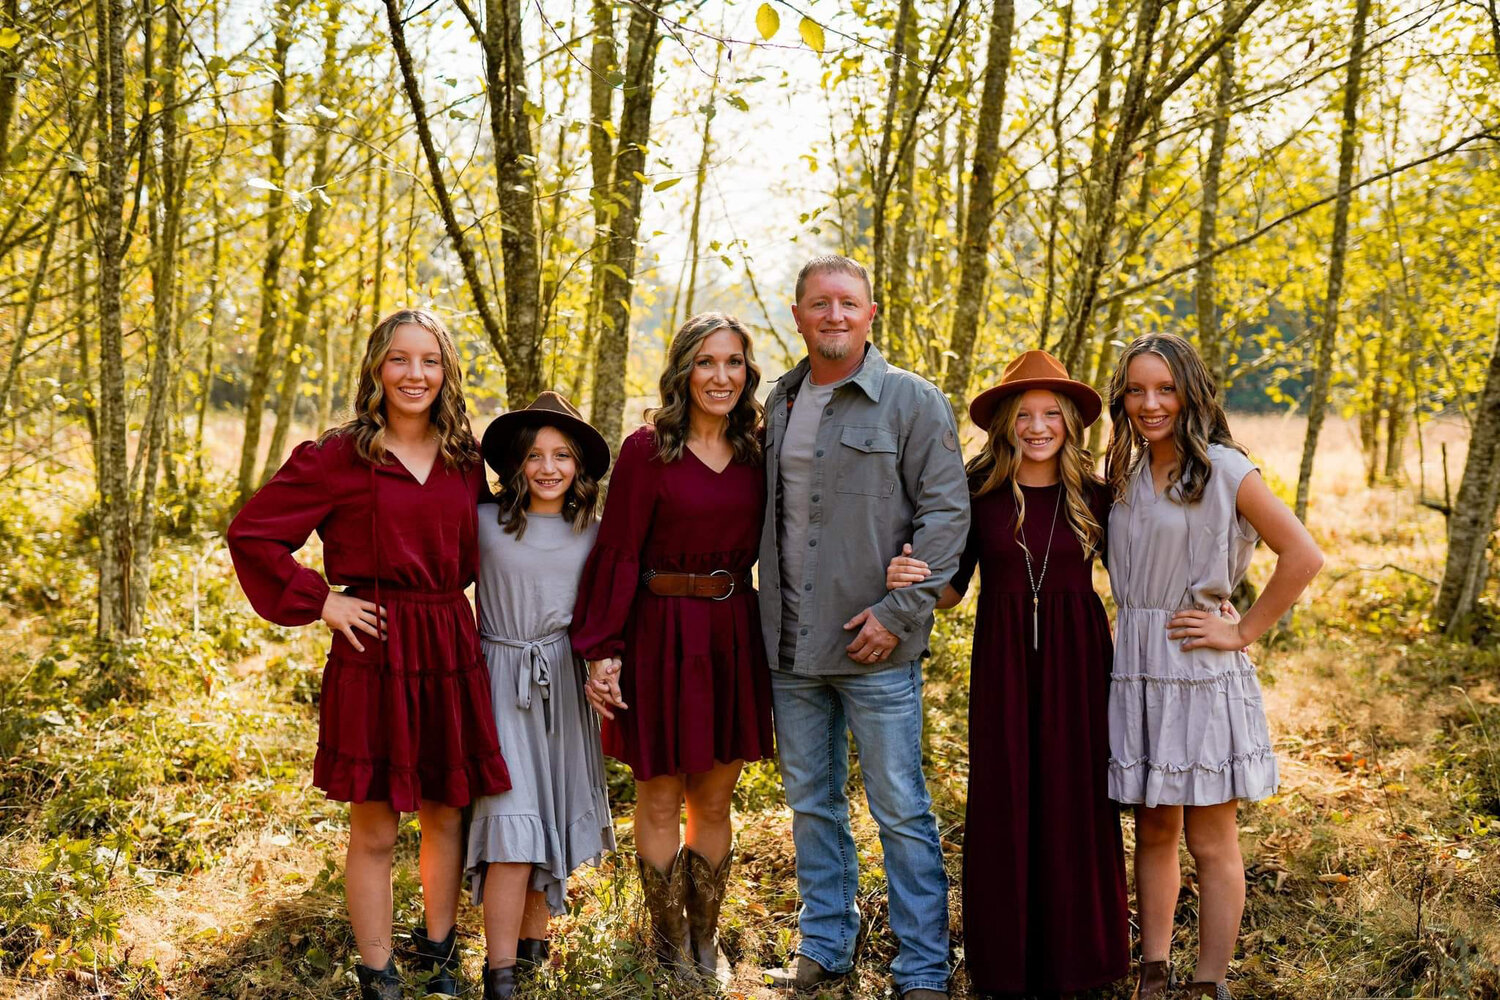 The Tobin family is pictured in this courtesy photo. From left, 14-year-old Taylor, 10-year-old Tylie, Fallon, Roger, 12-year-old Tinsley, and 14-year-old Tanner.